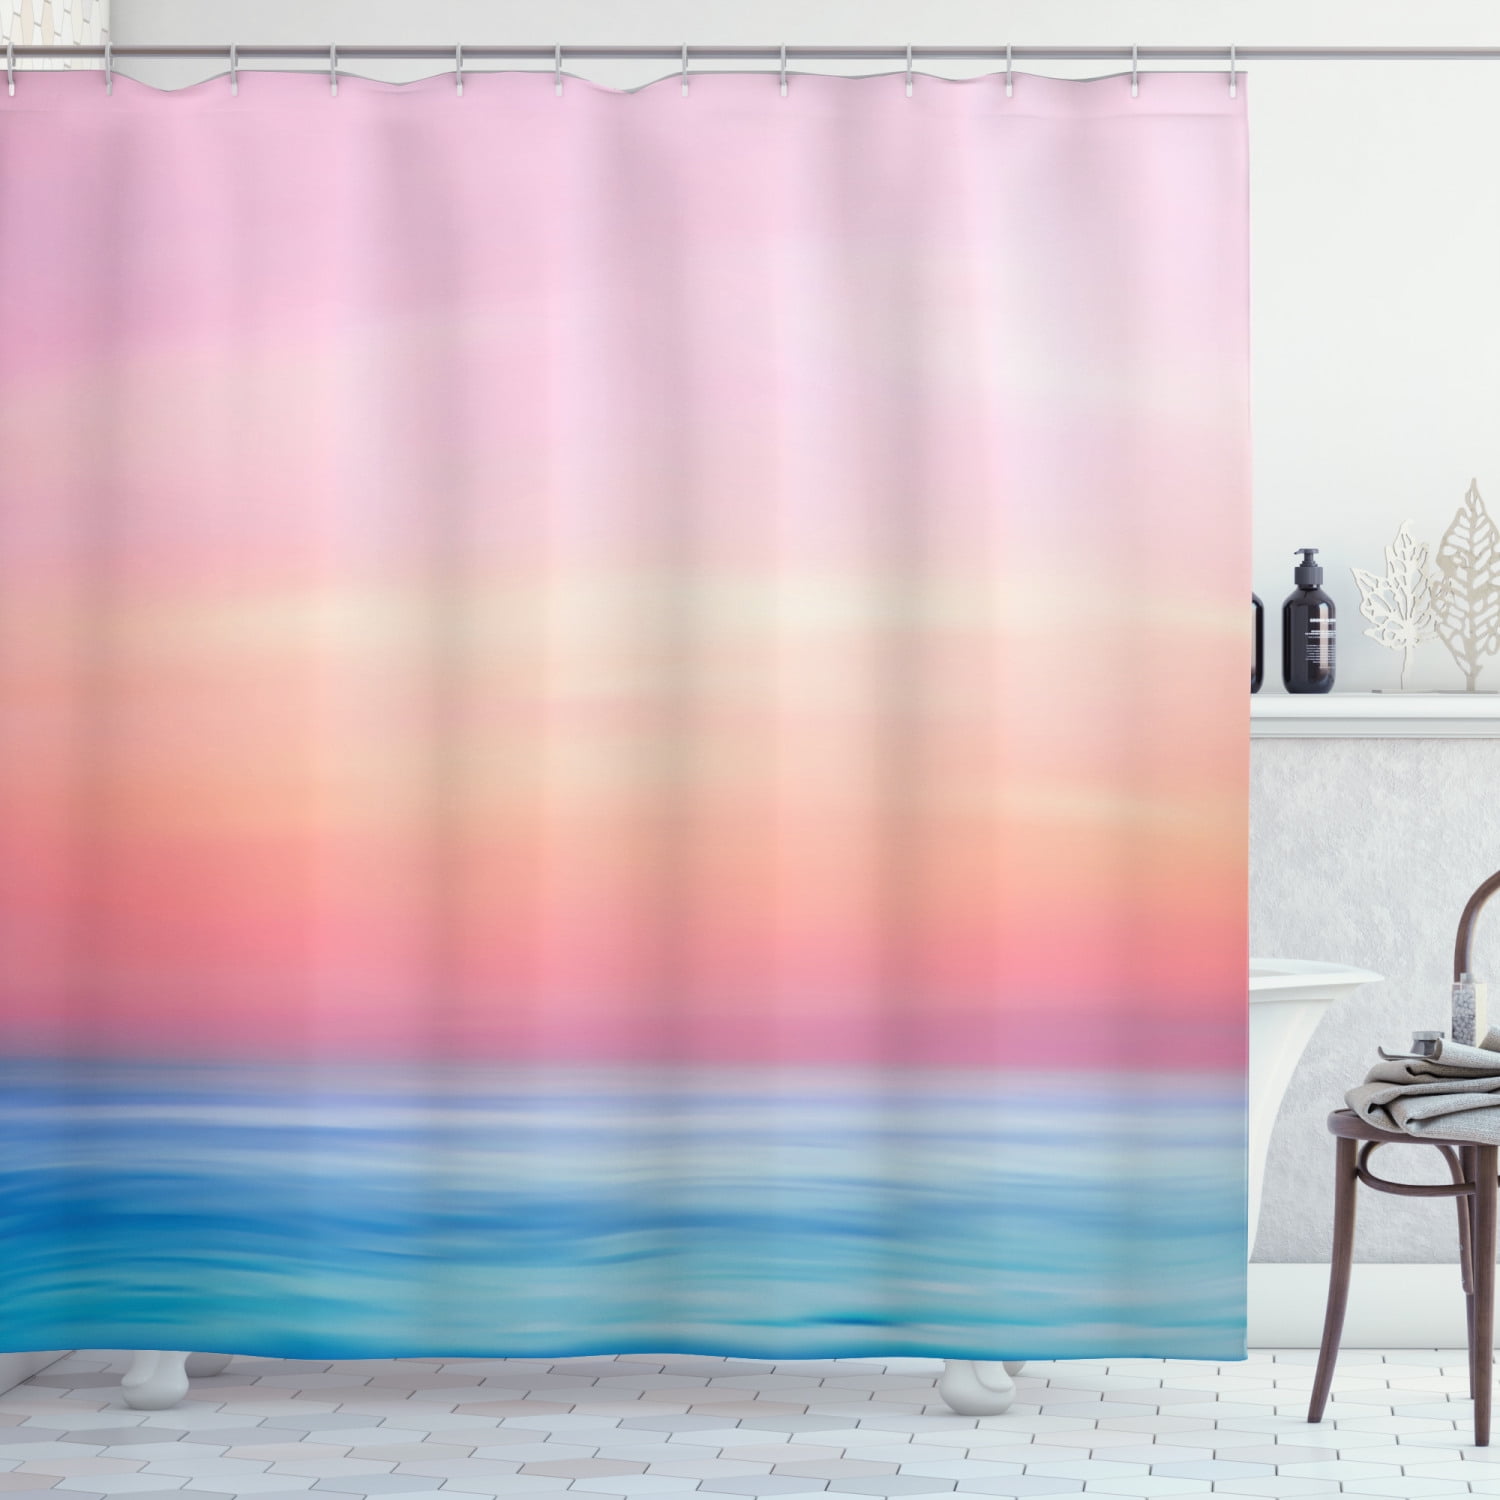 Details about   Seaview Polyester Bath Shower Curtain Liner Waterproof Bathroom Fabric Hook Mats 